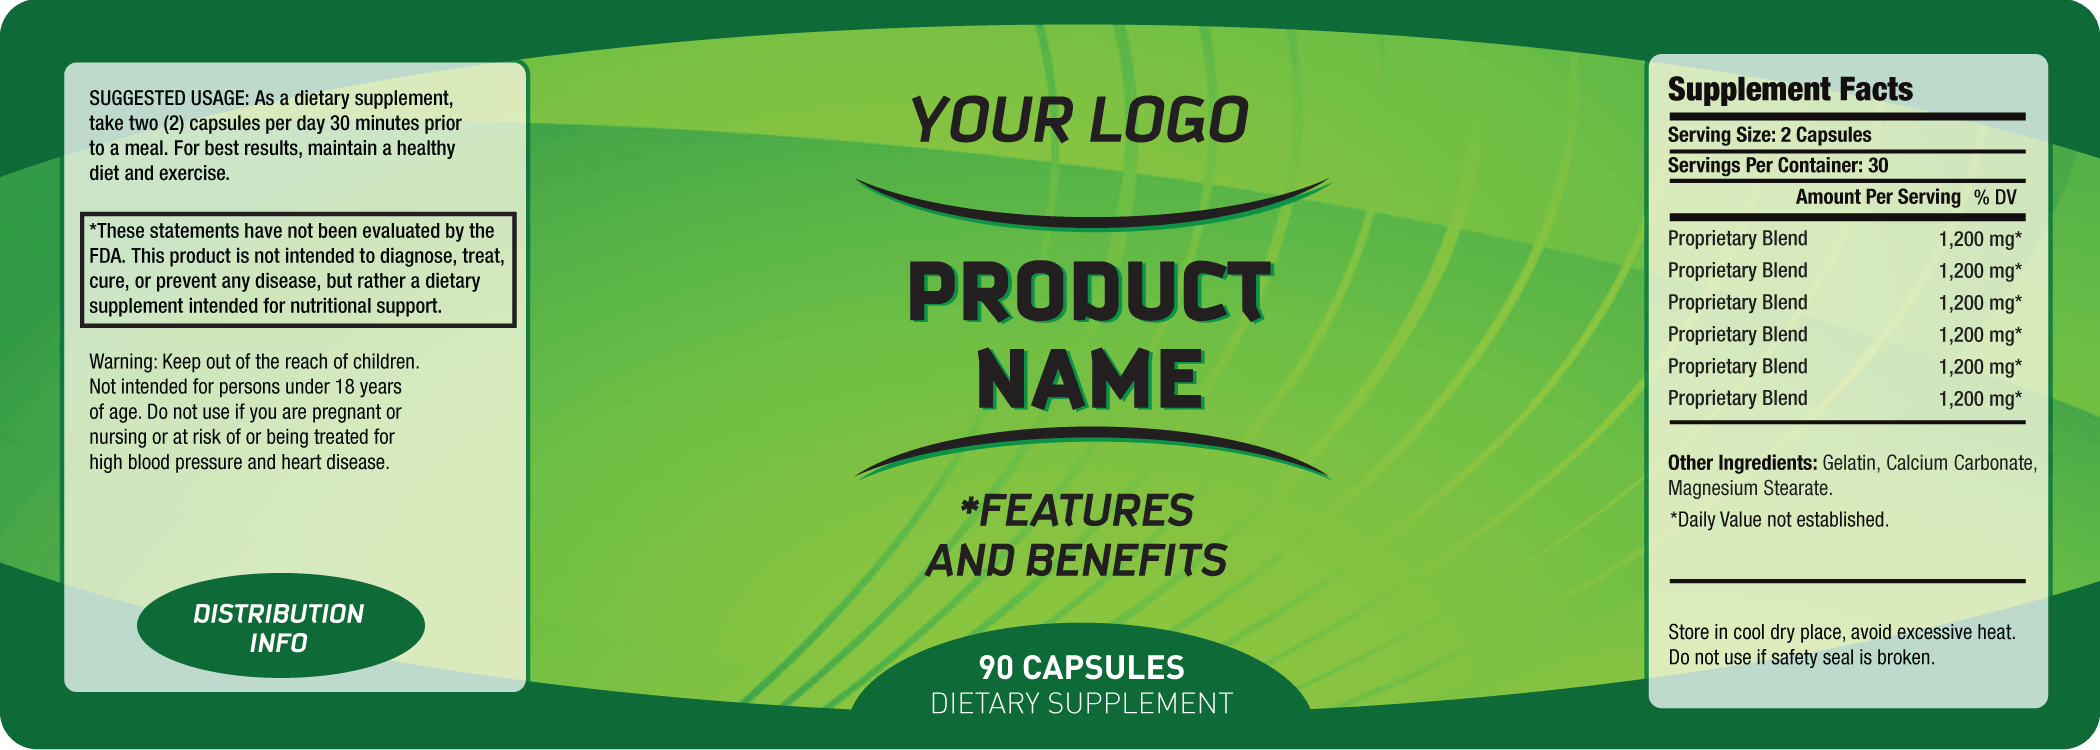 free label template 55